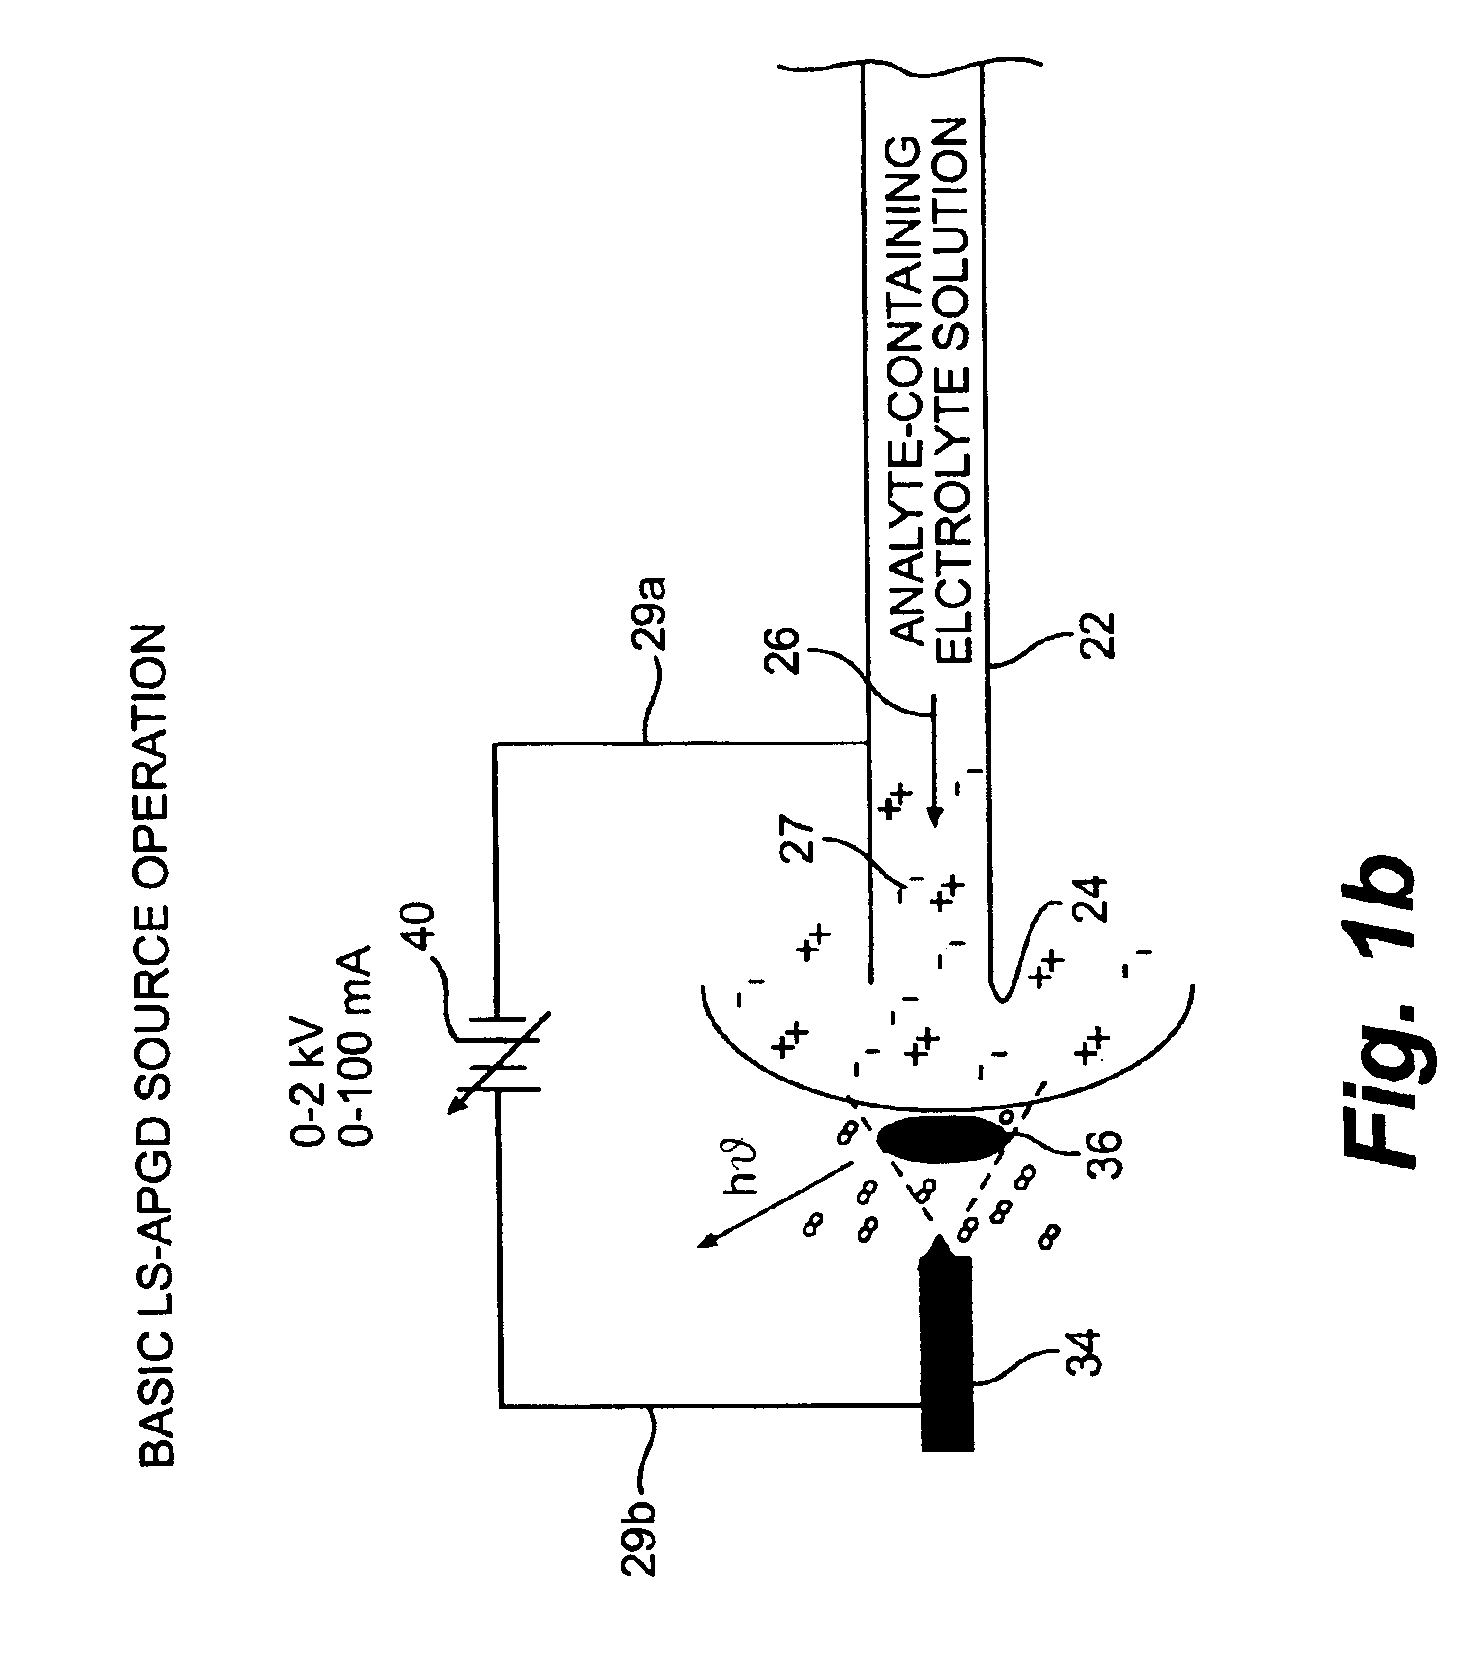 Atmospheric pressure, glow discharge, optical emission source for the direct sampling of liquid media